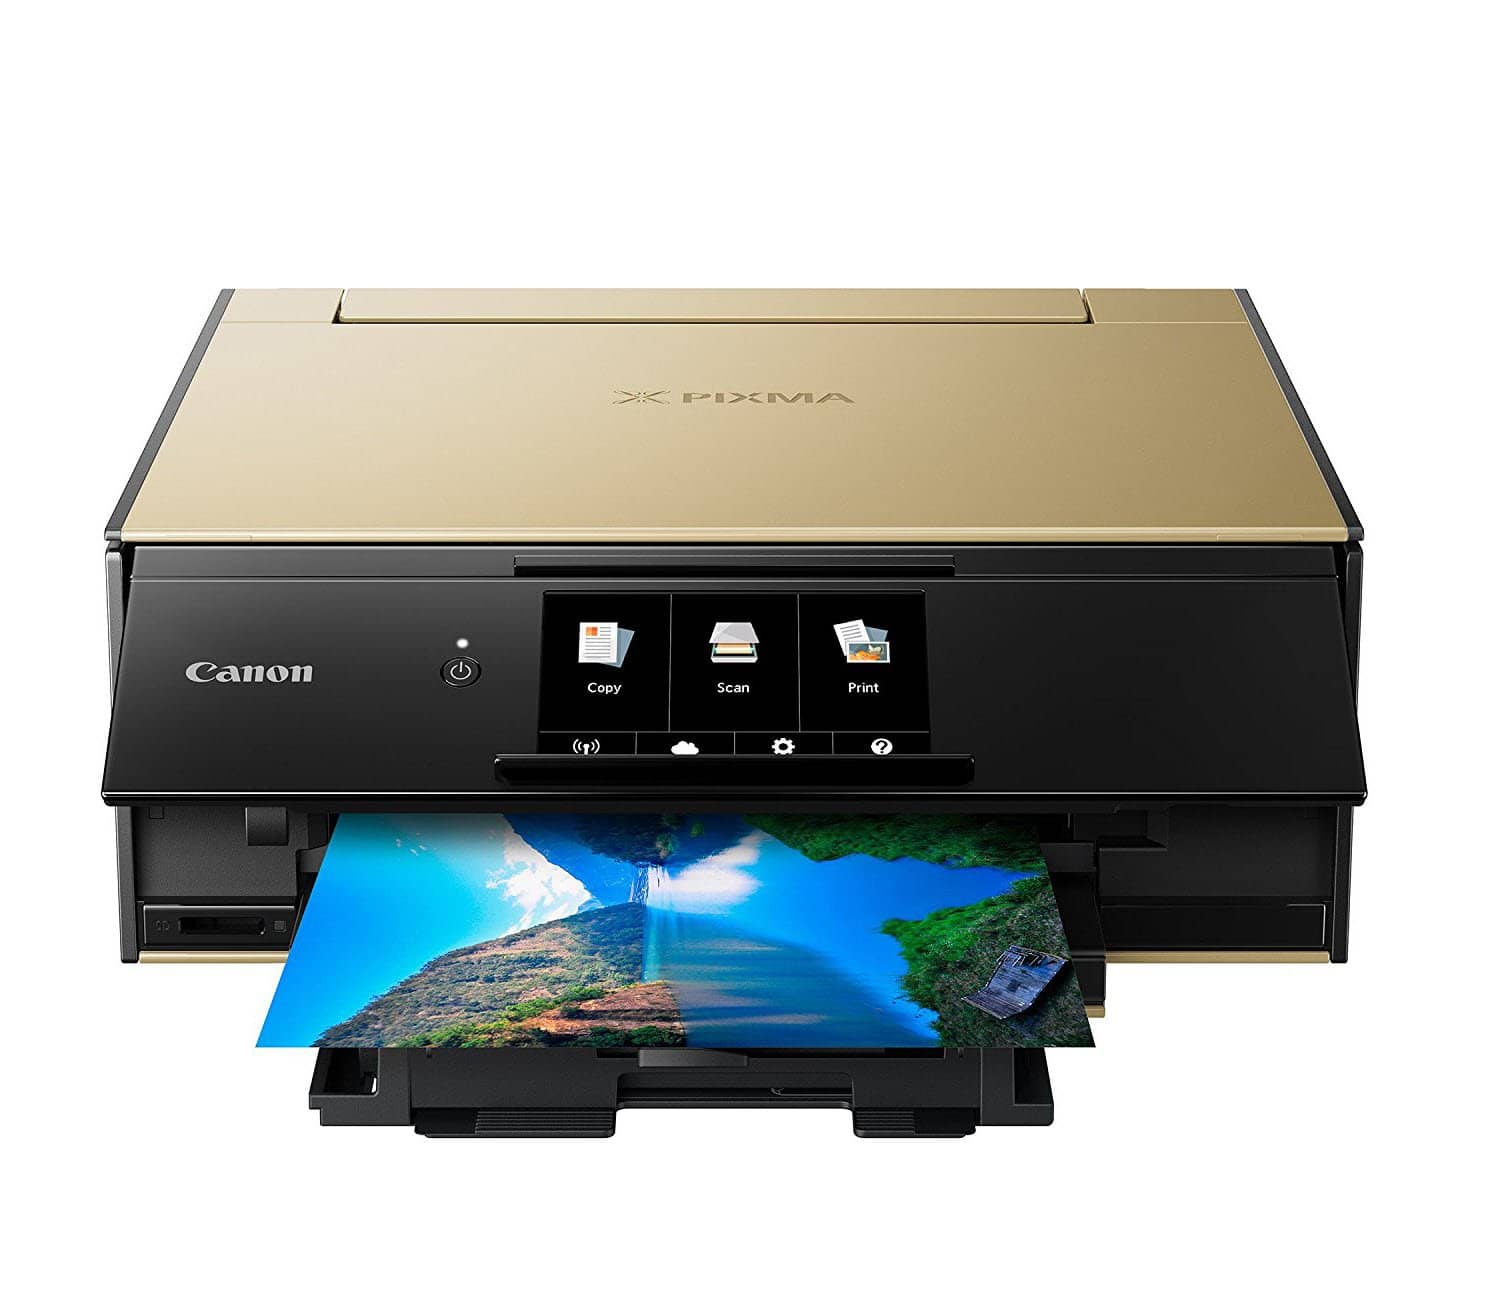 Canon TS9120 Wireless All-In-One Printer with Scanner and Copier - Gold